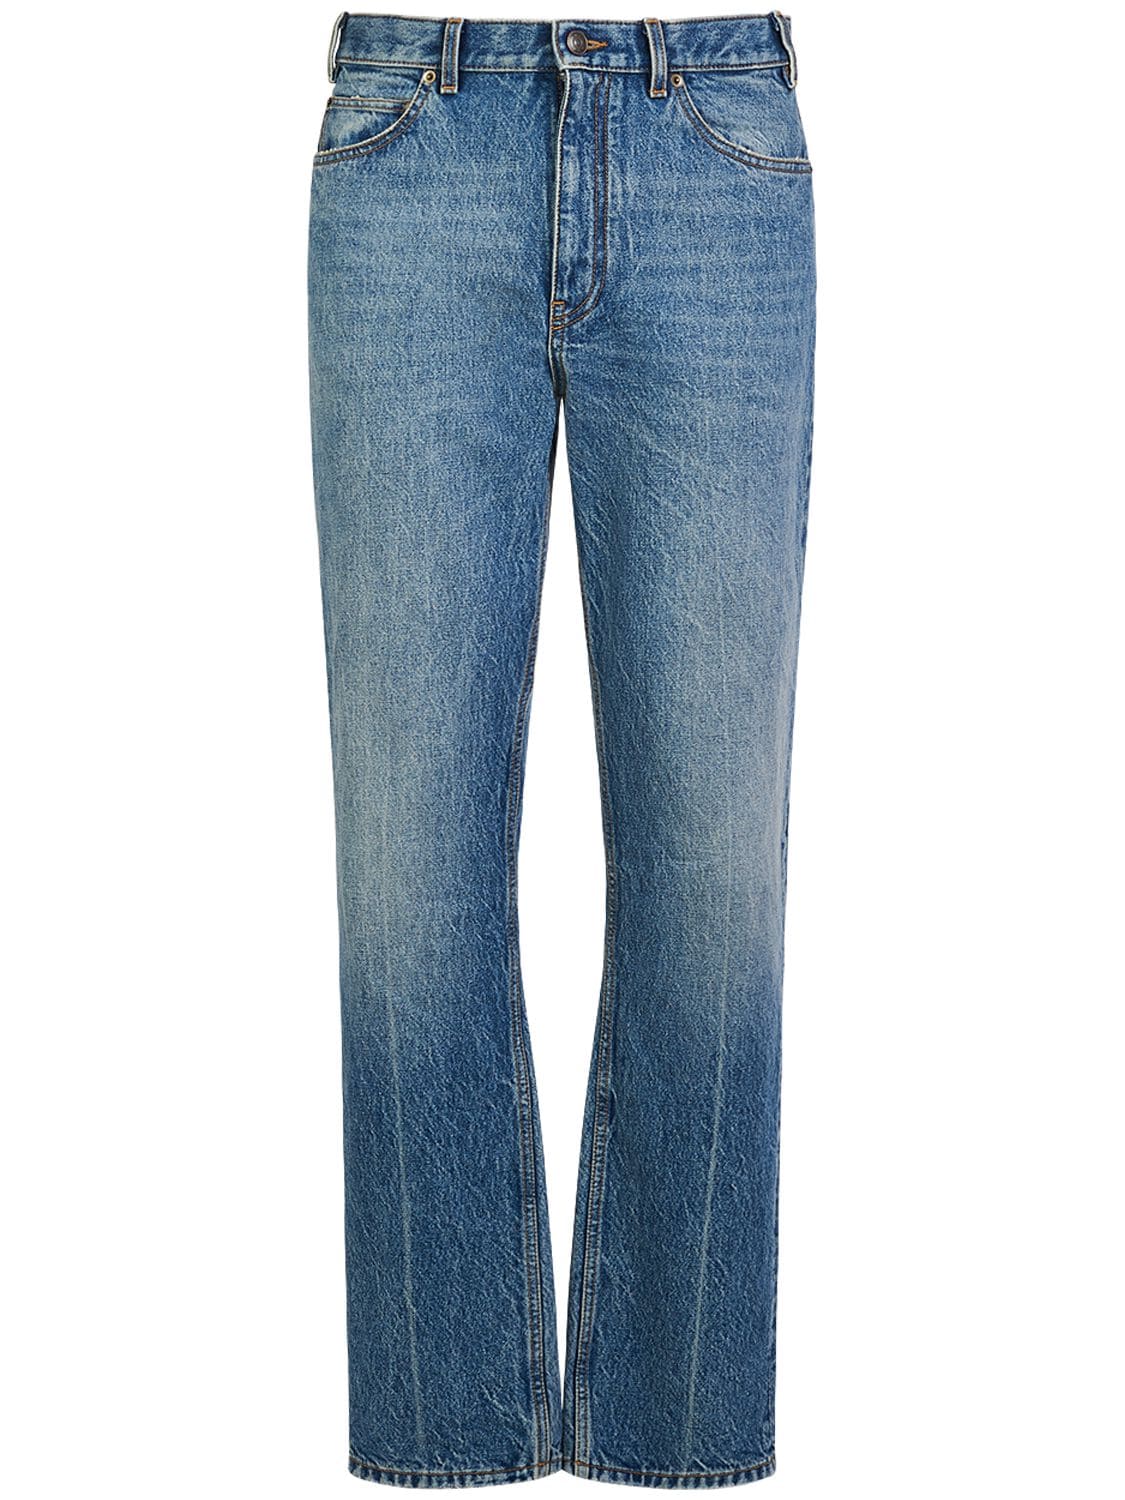 Image of Fred Jean Cotton Jeans